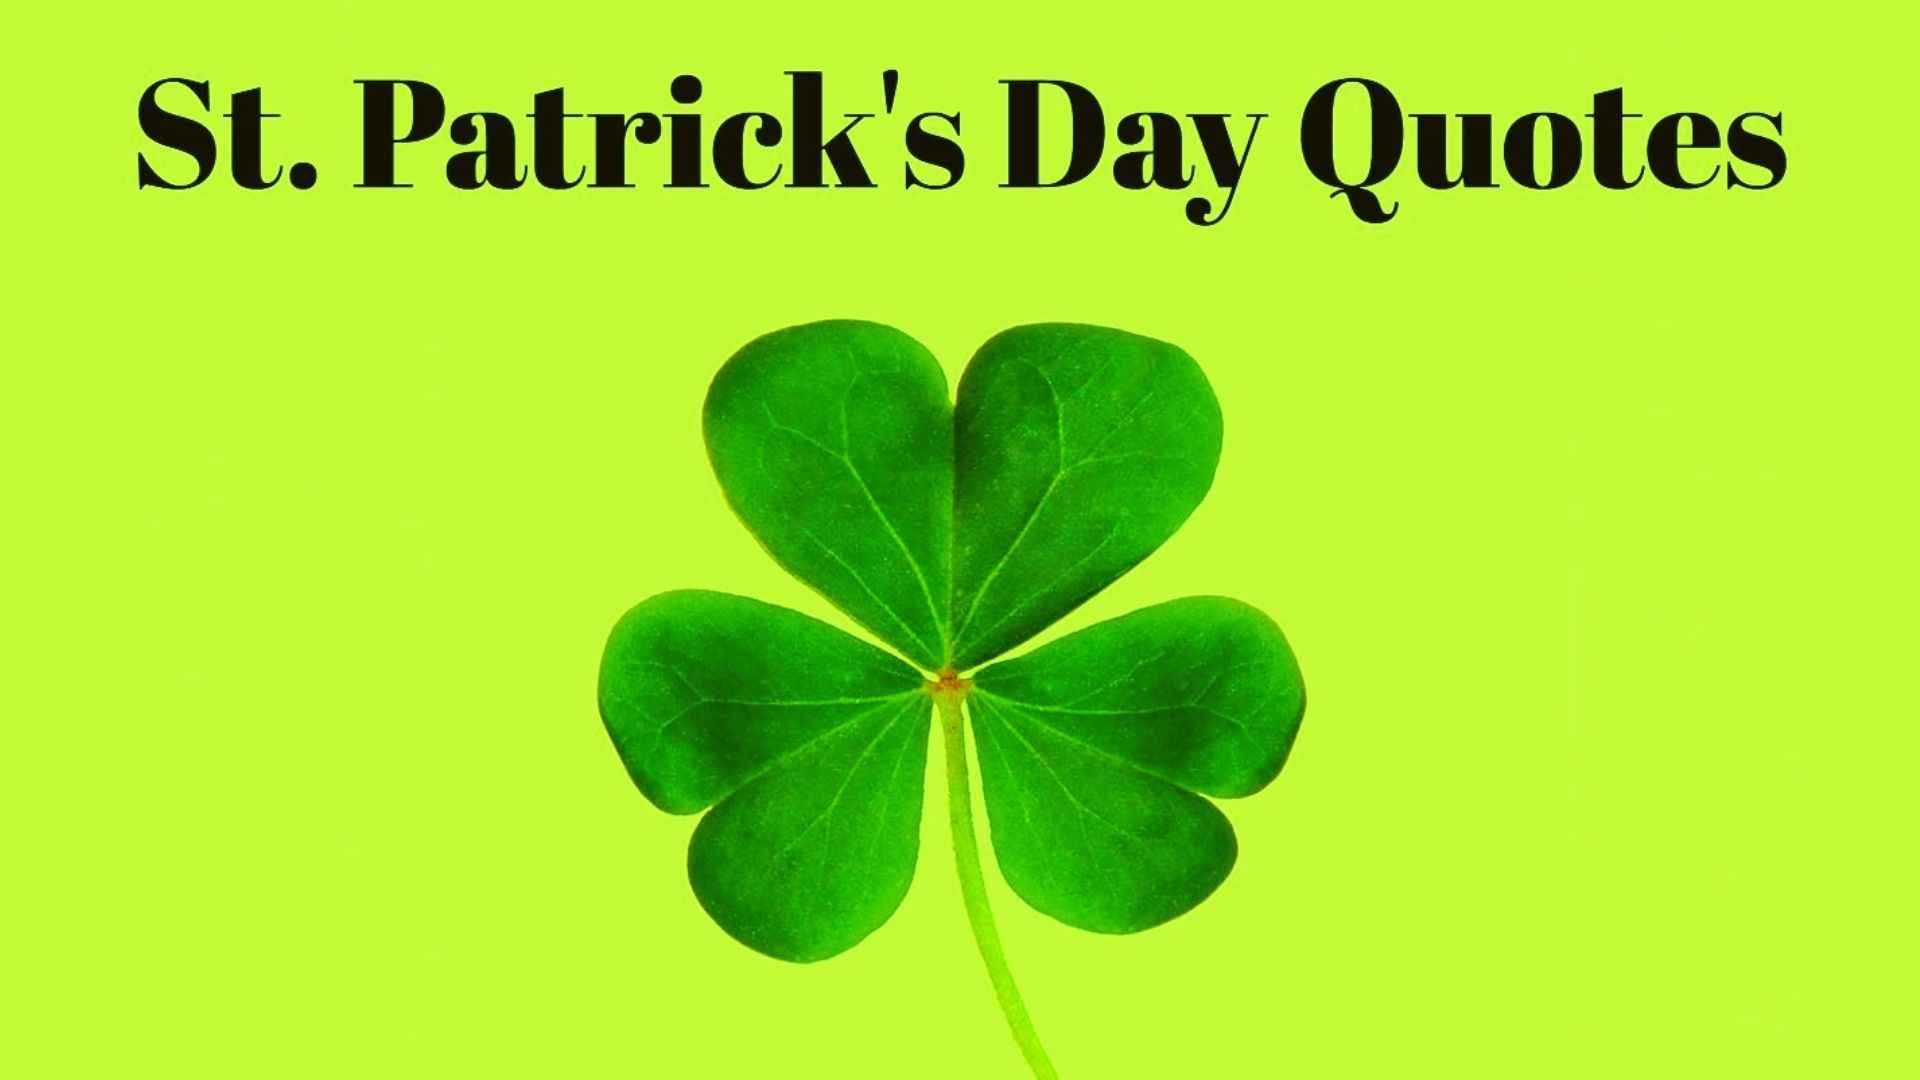 St. Patricks Day Quotes | 17 March 2022